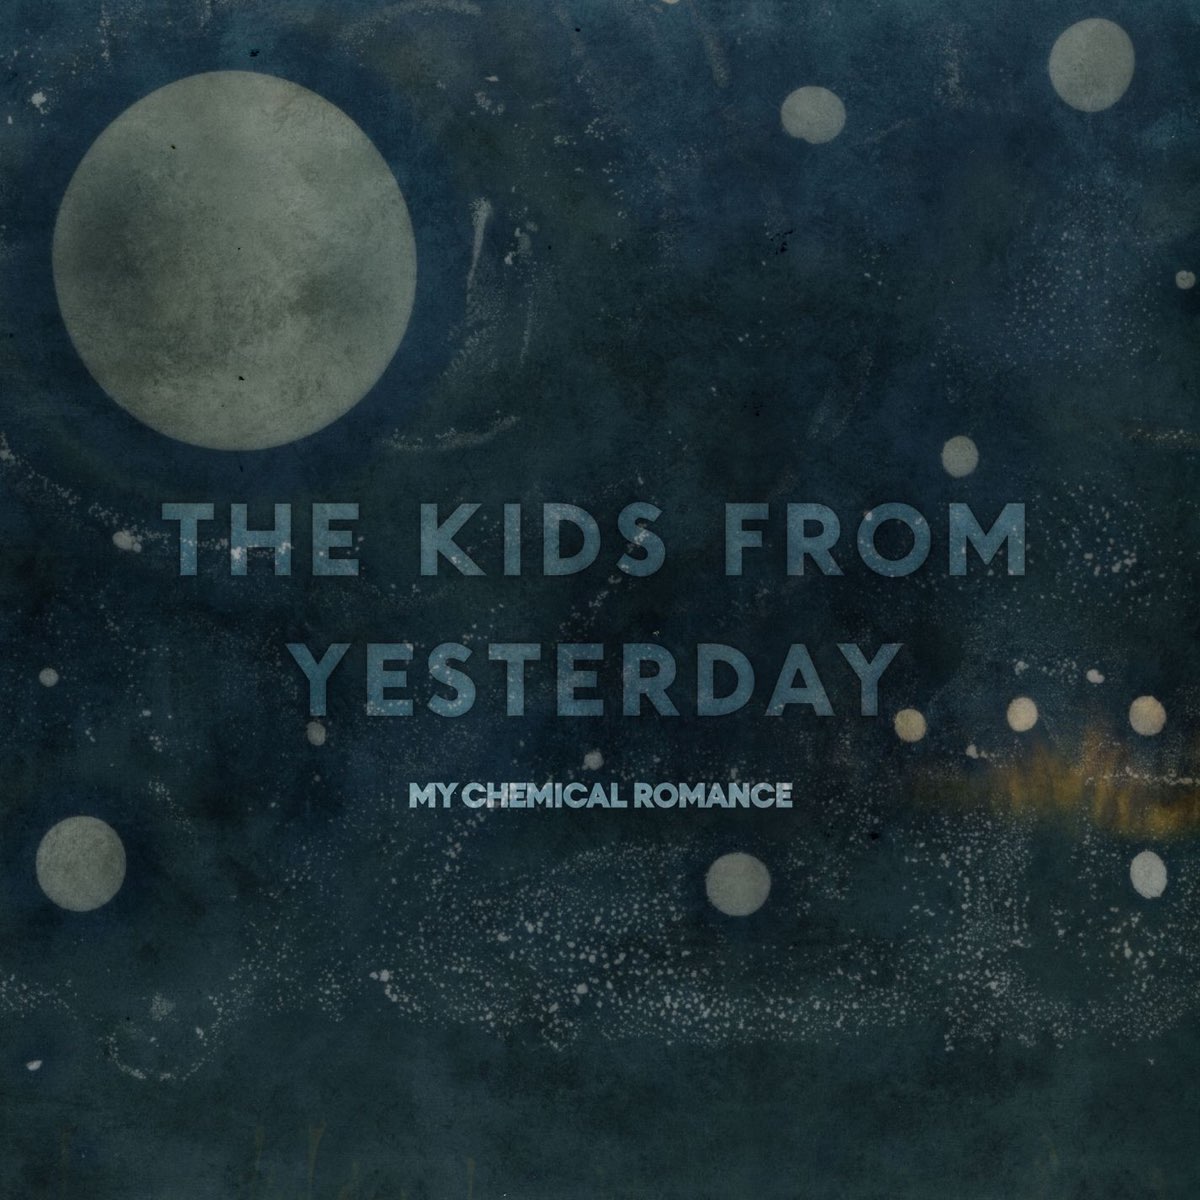 My Chemical Romance — The Kids from Yesterday cover artwork